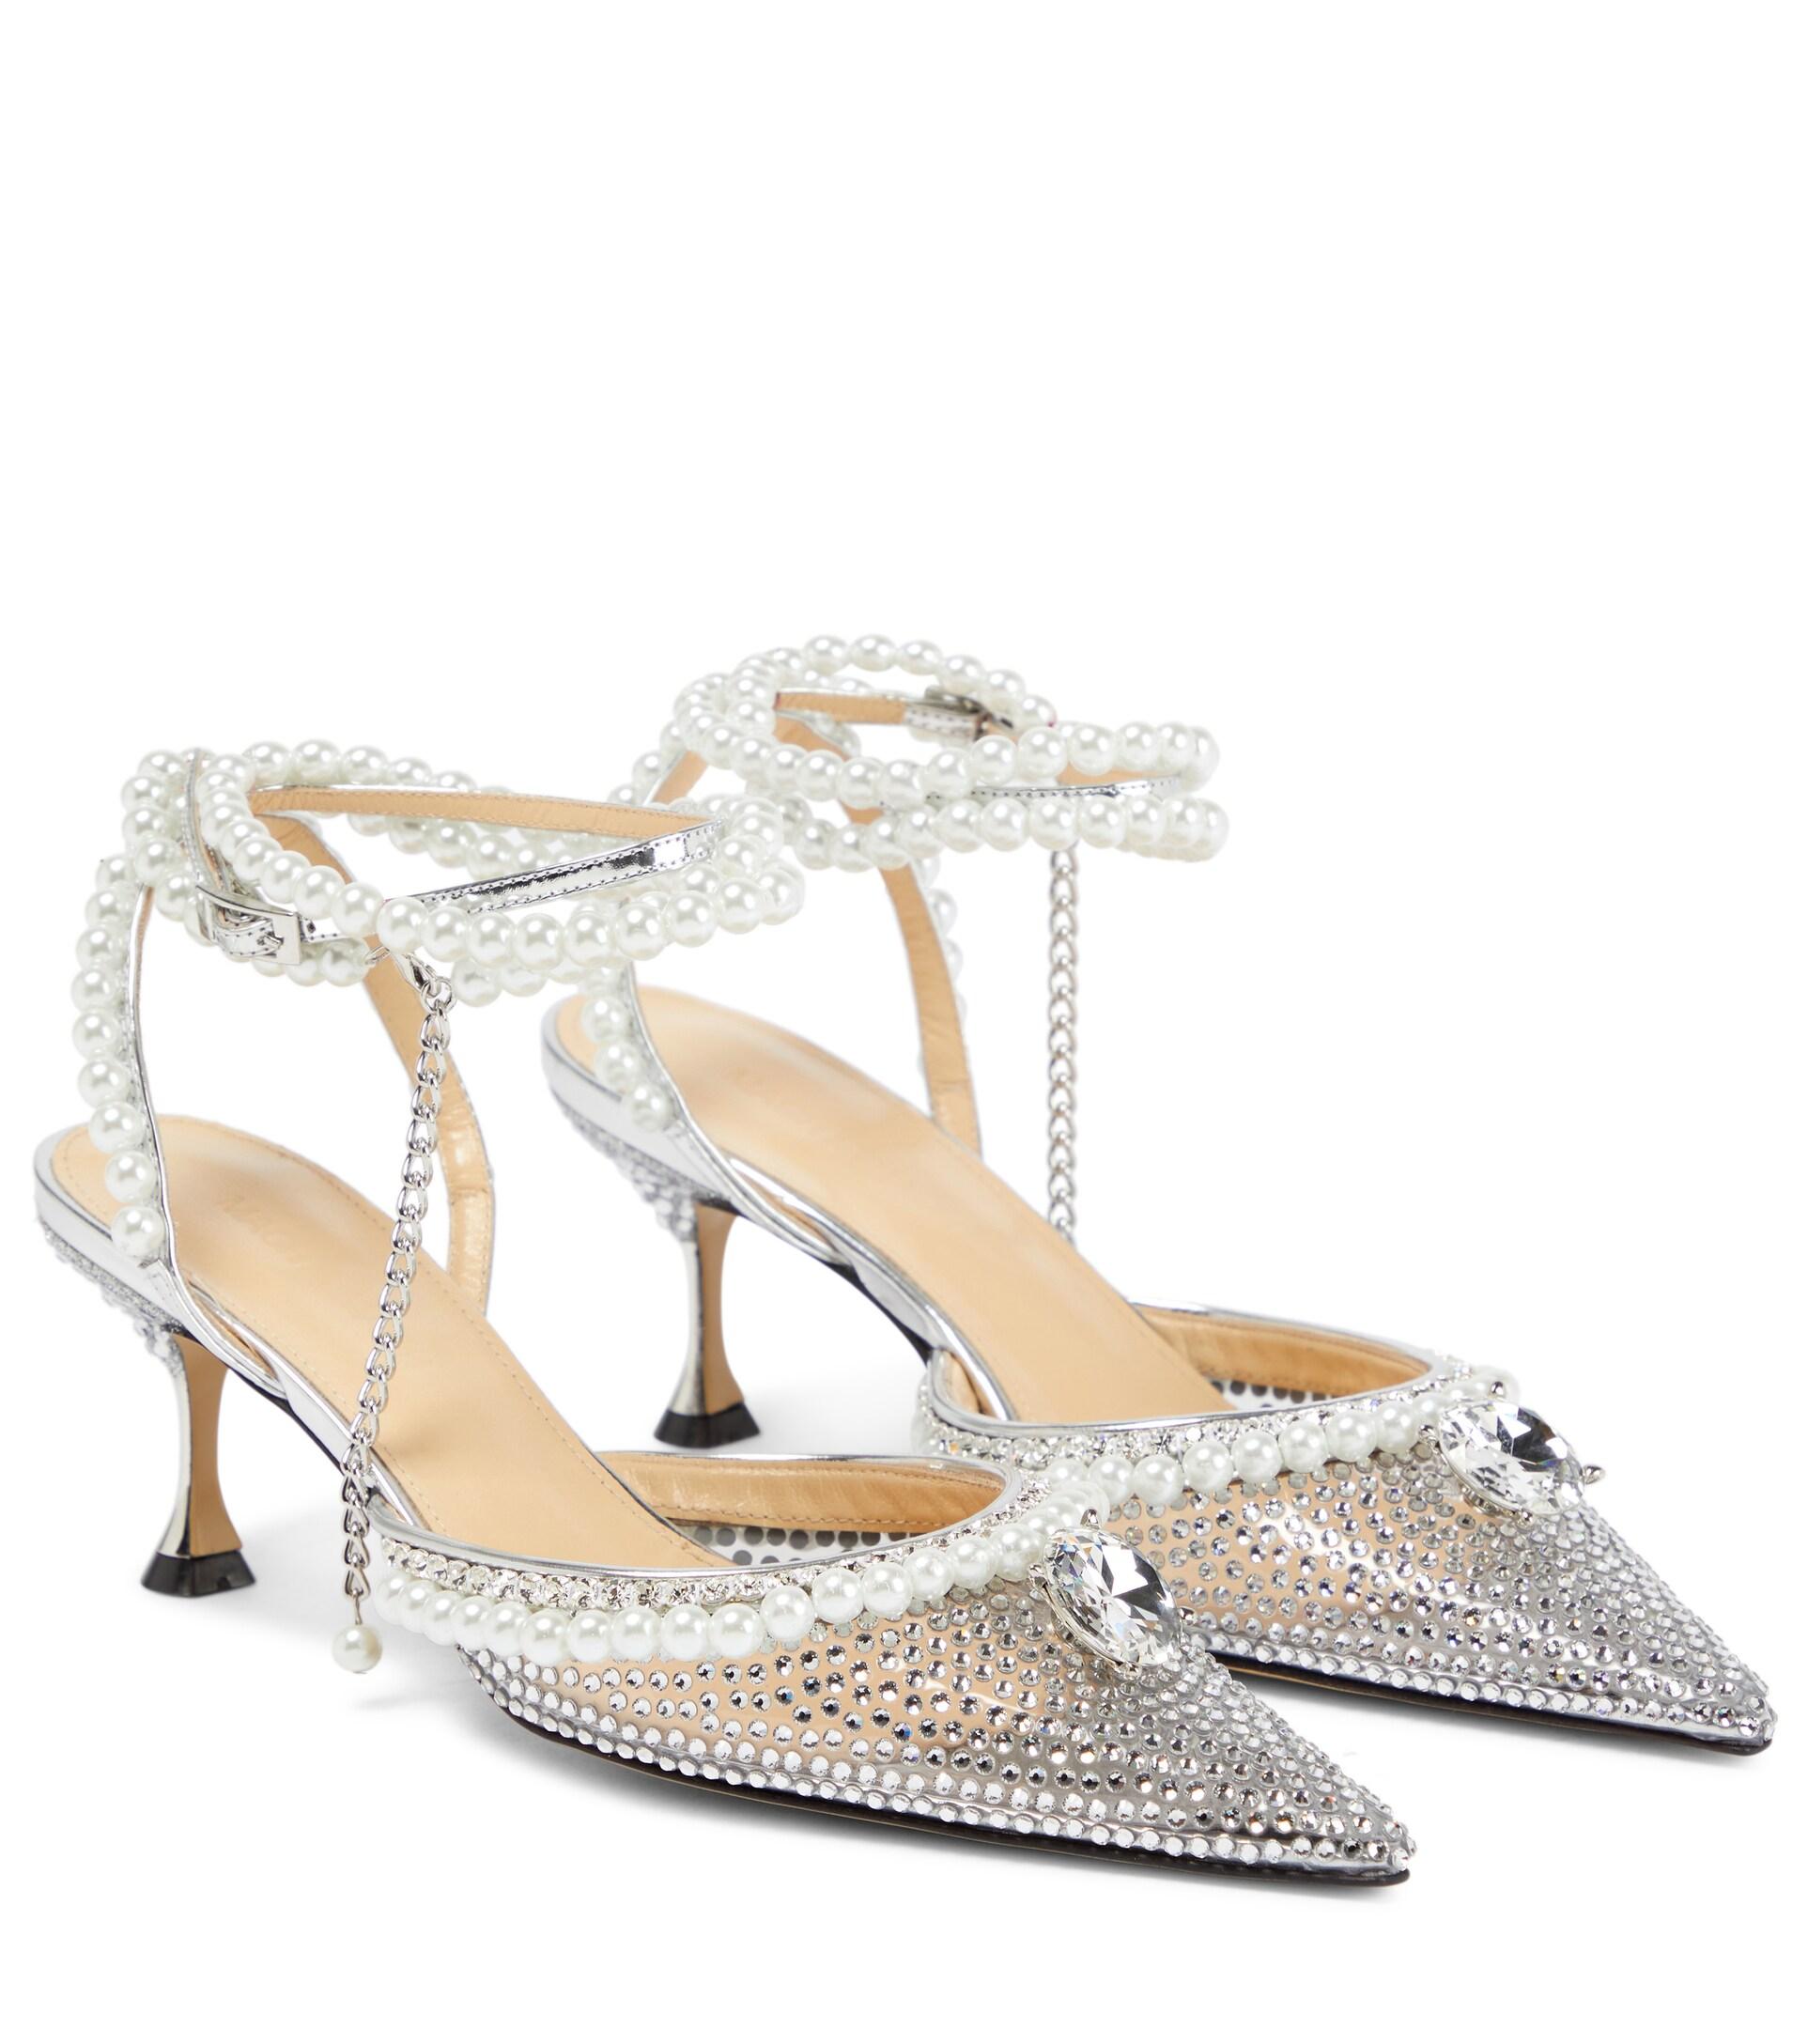 Mach & Mach Faux-pearl Embellished Pvc Pumps in White | Lyst